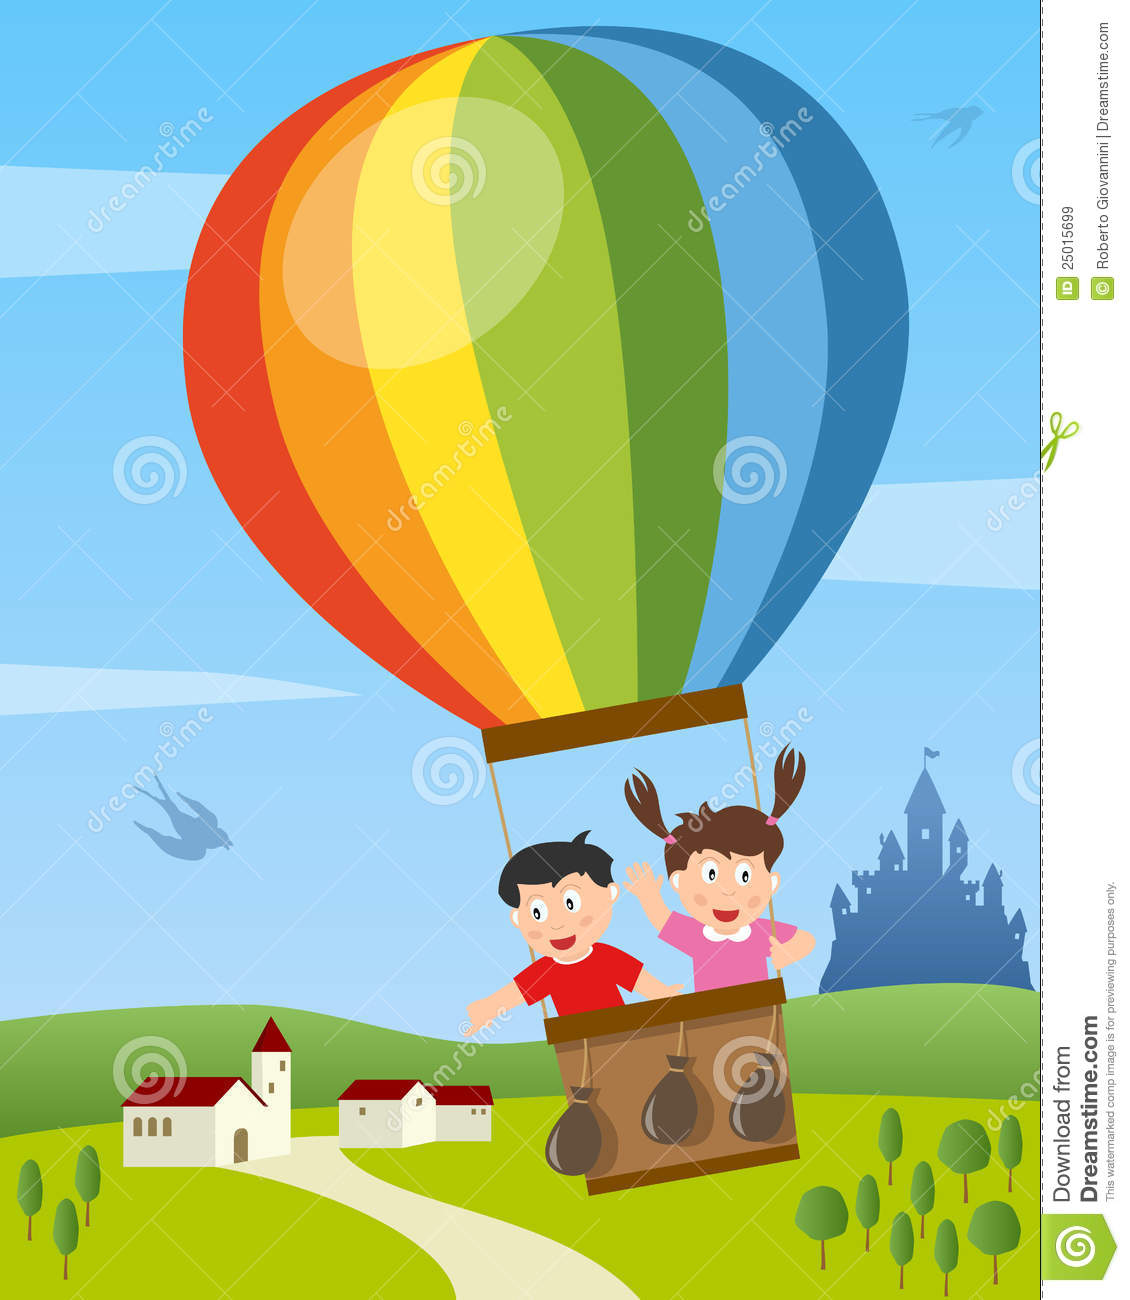 Clipart boy flying in hot air balloon with animals.